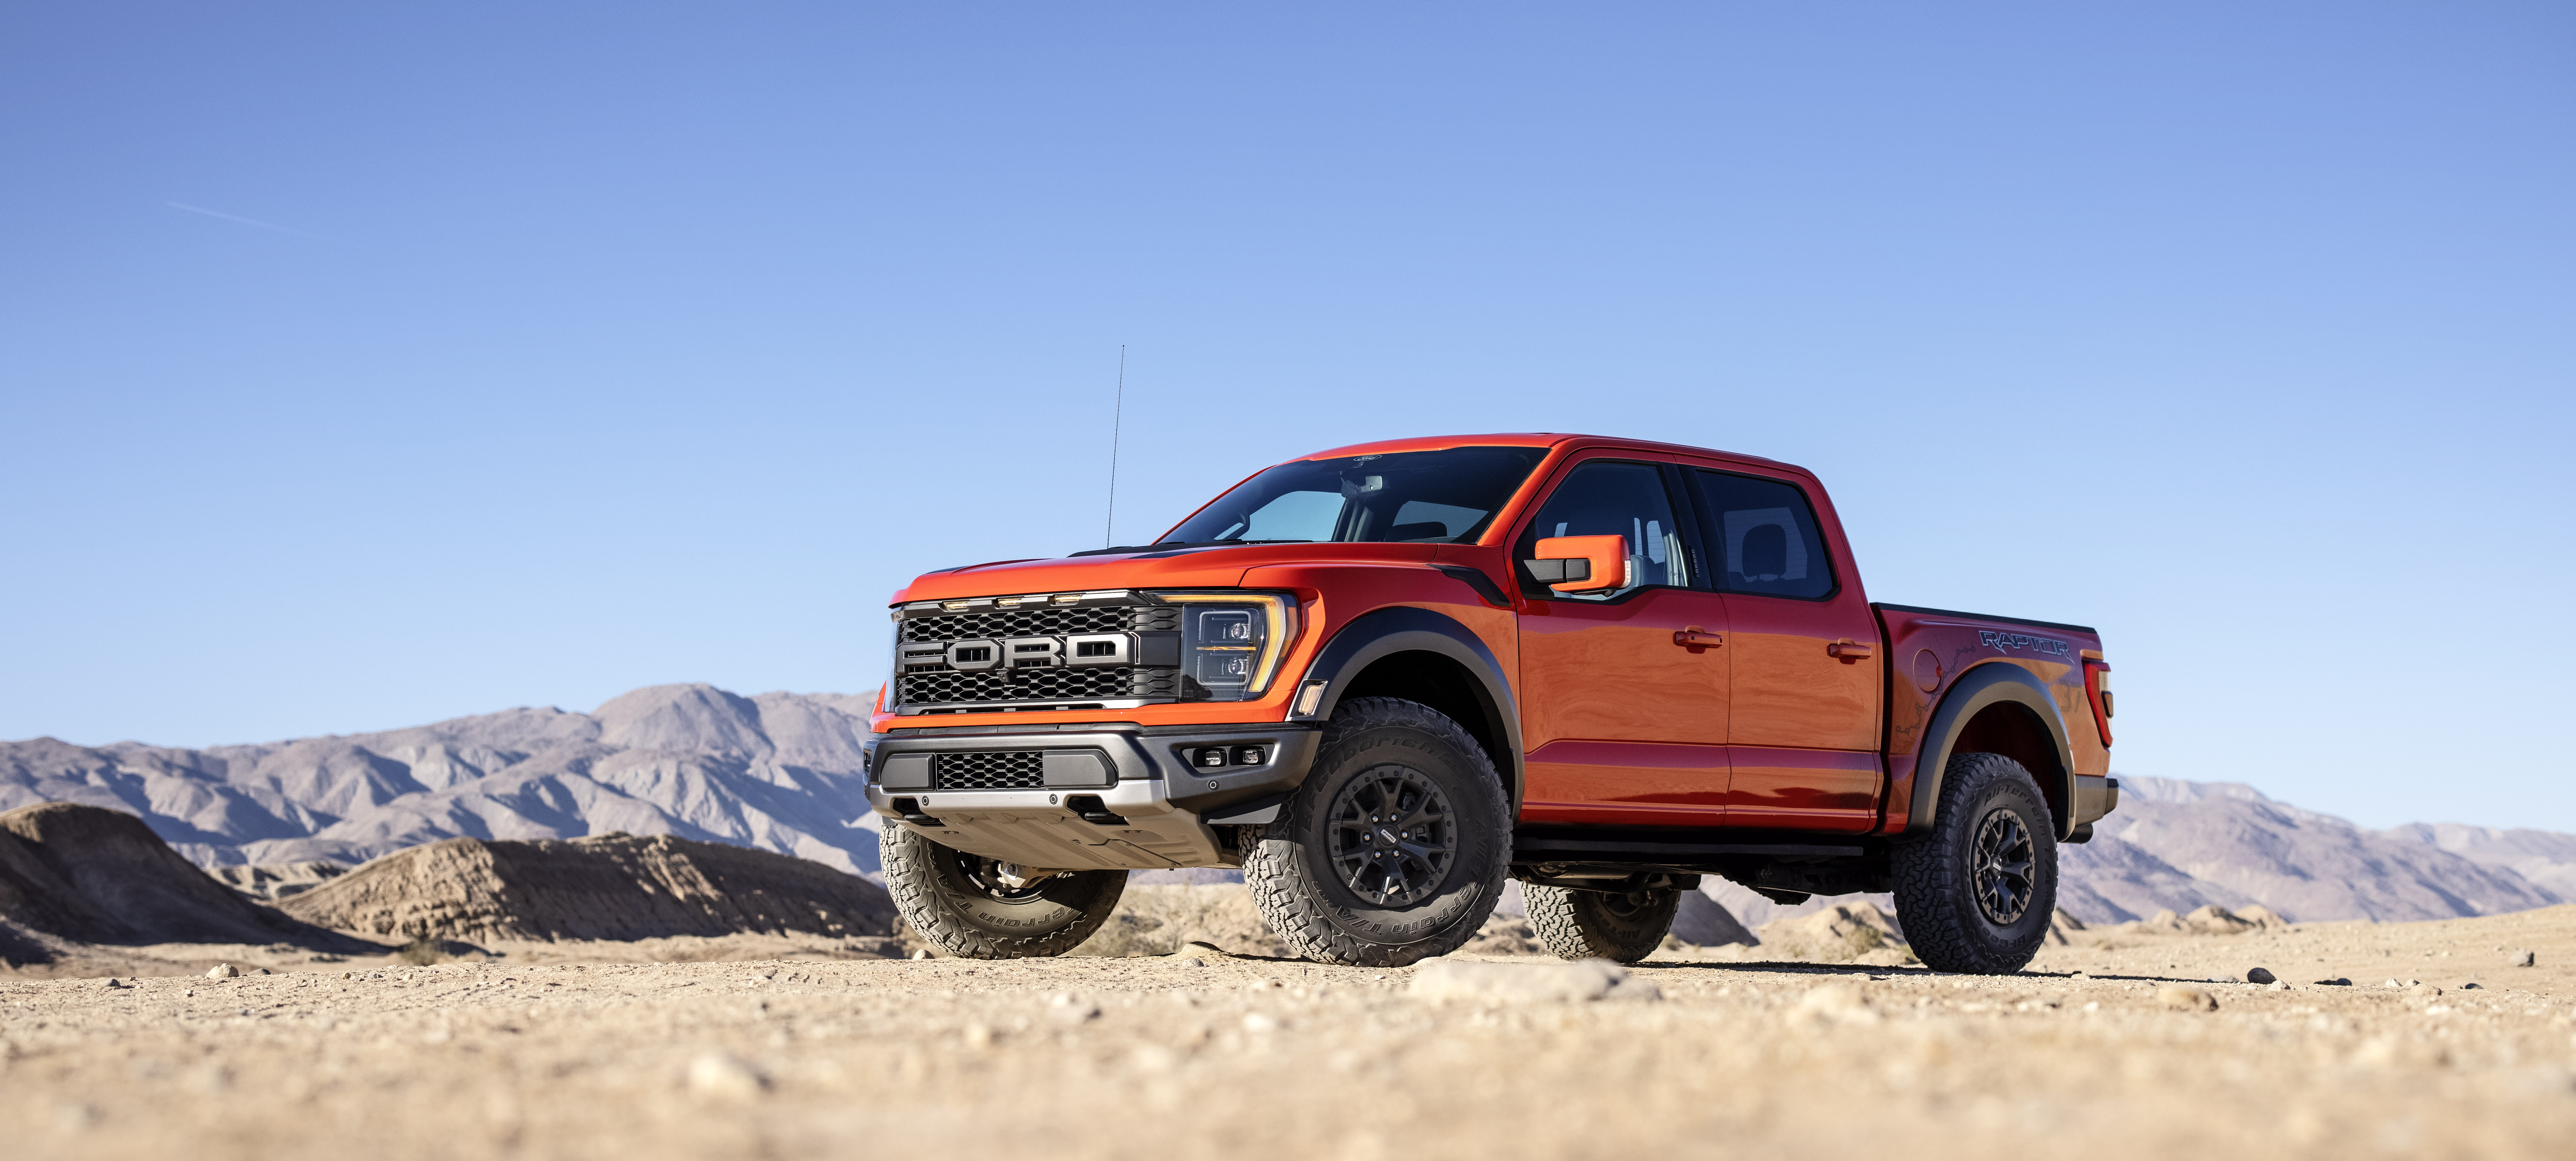 2021 Ford F150 Raptor Red POSTER 24 X 36 INCH